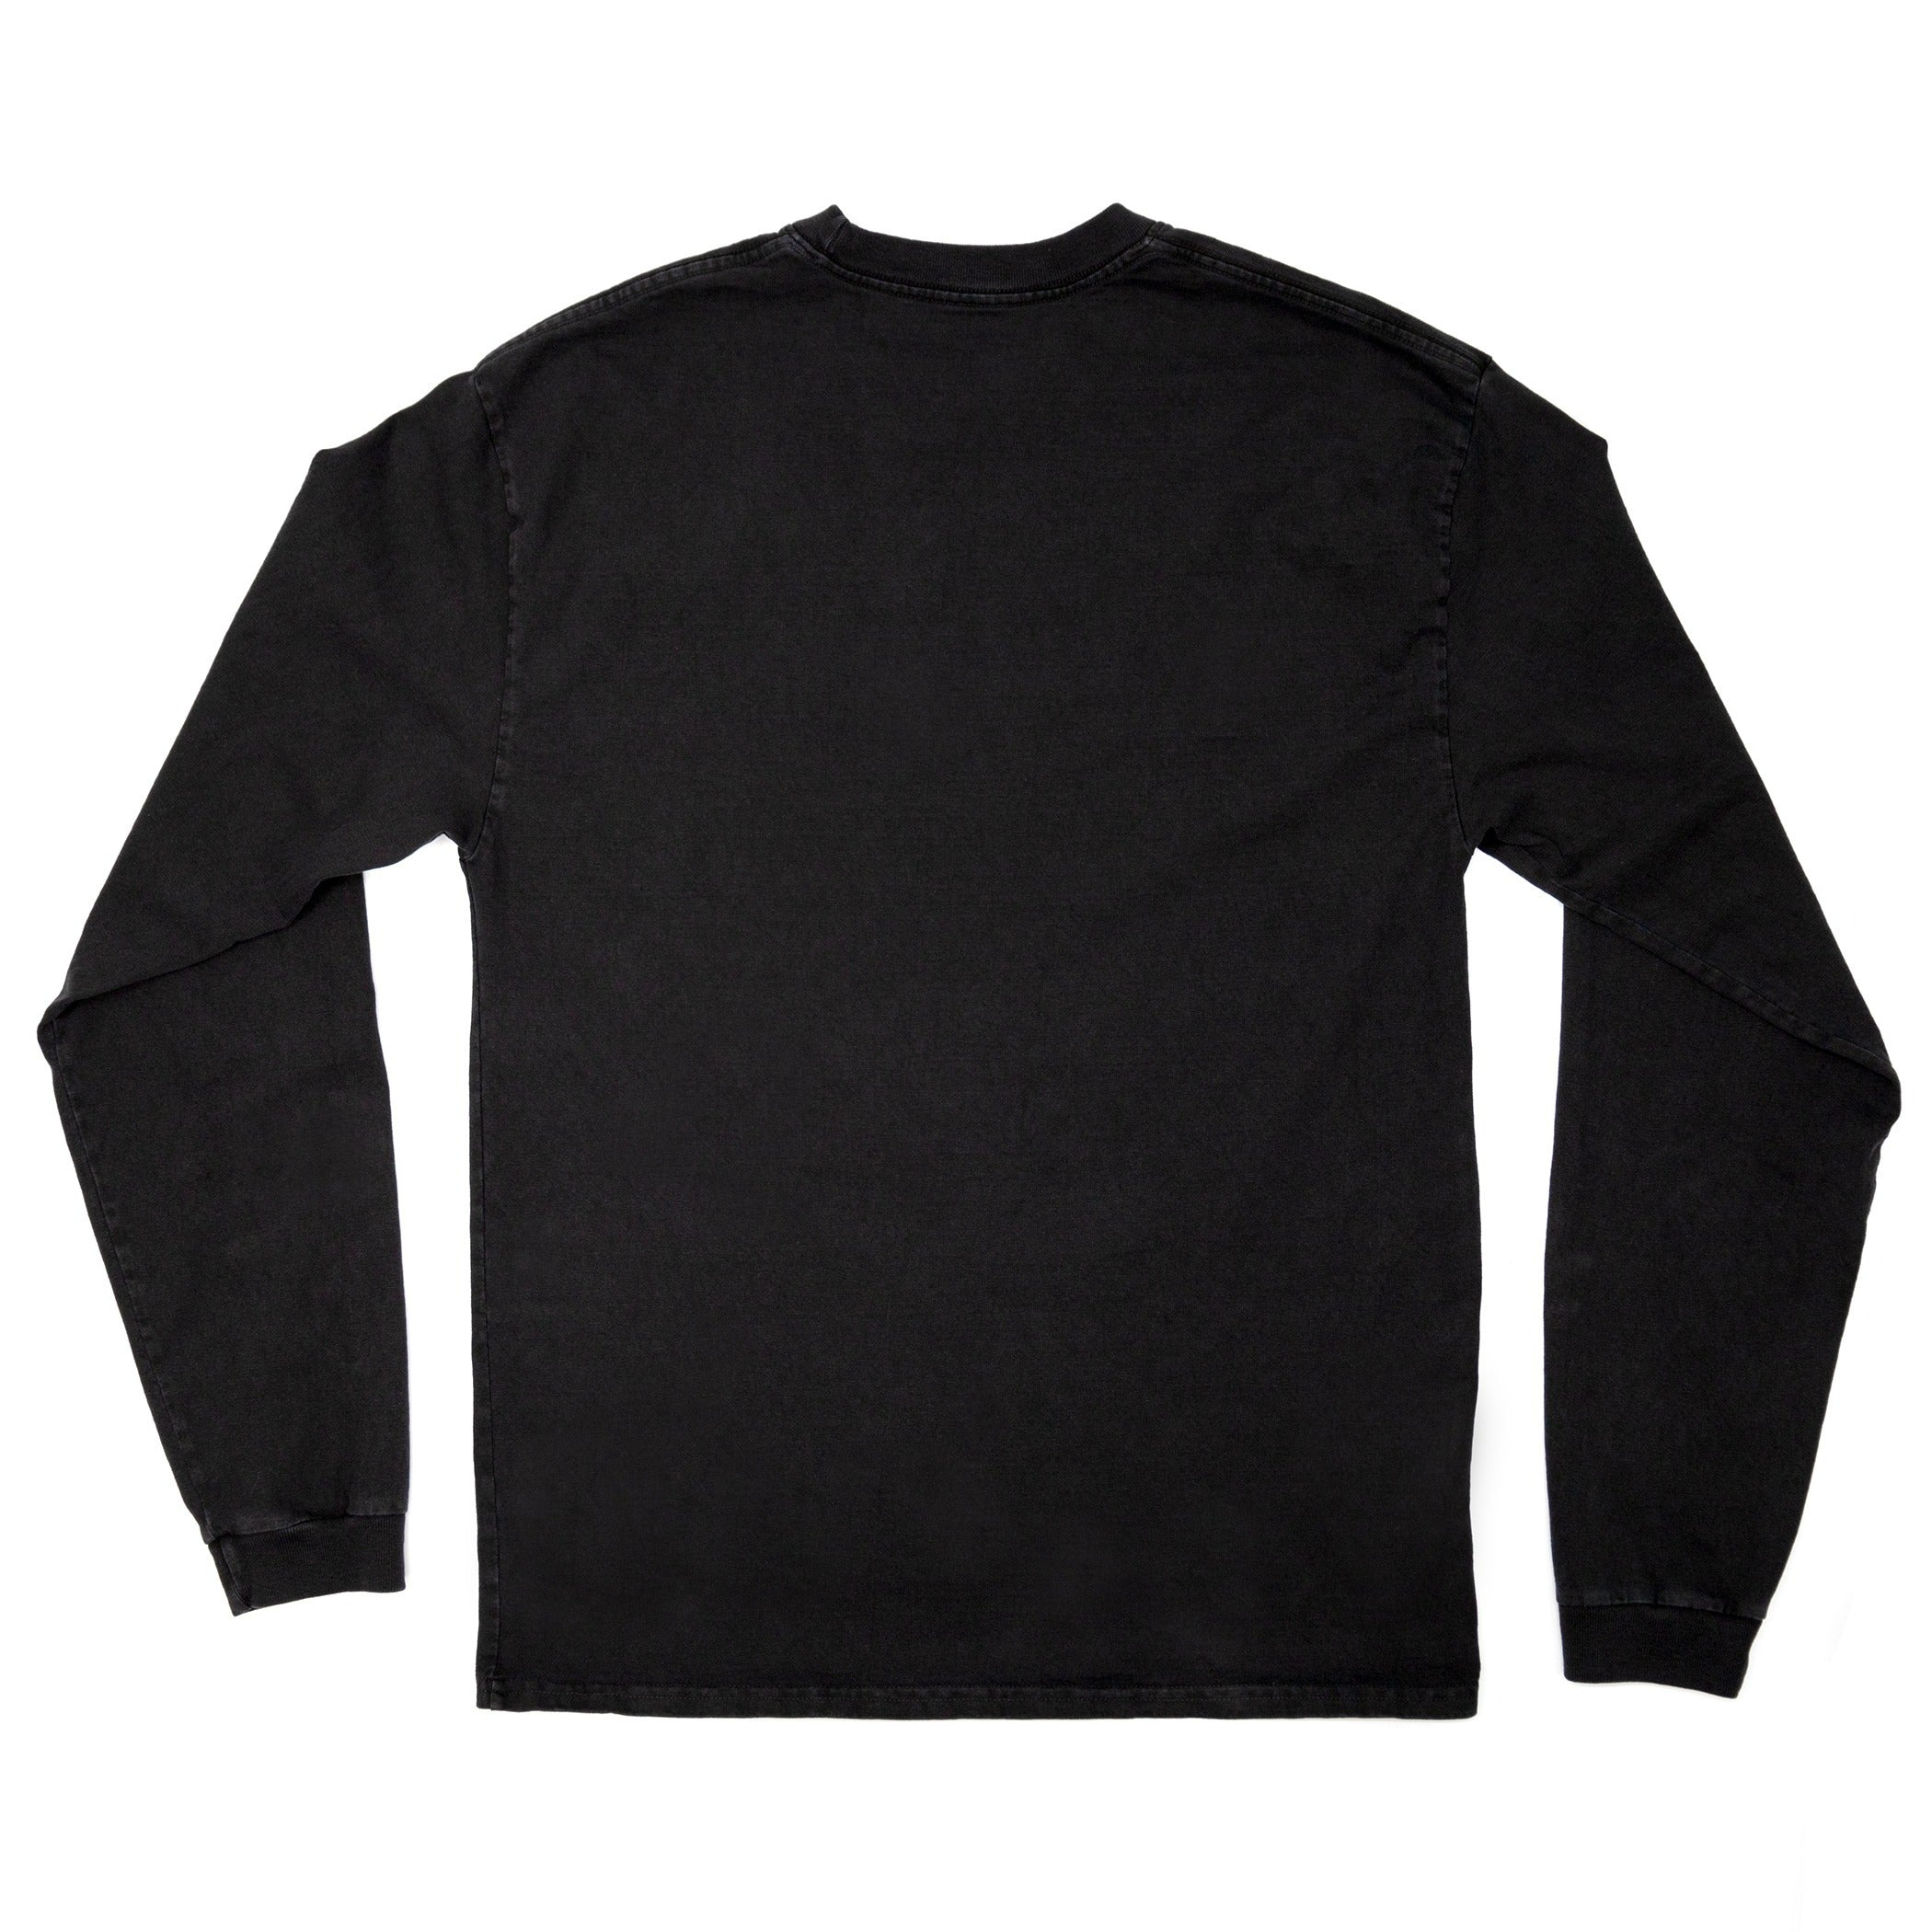 BACK VIEW OF HEAVYWEIGHT CLIMATE LONG SLEEVE. NO LOGO.